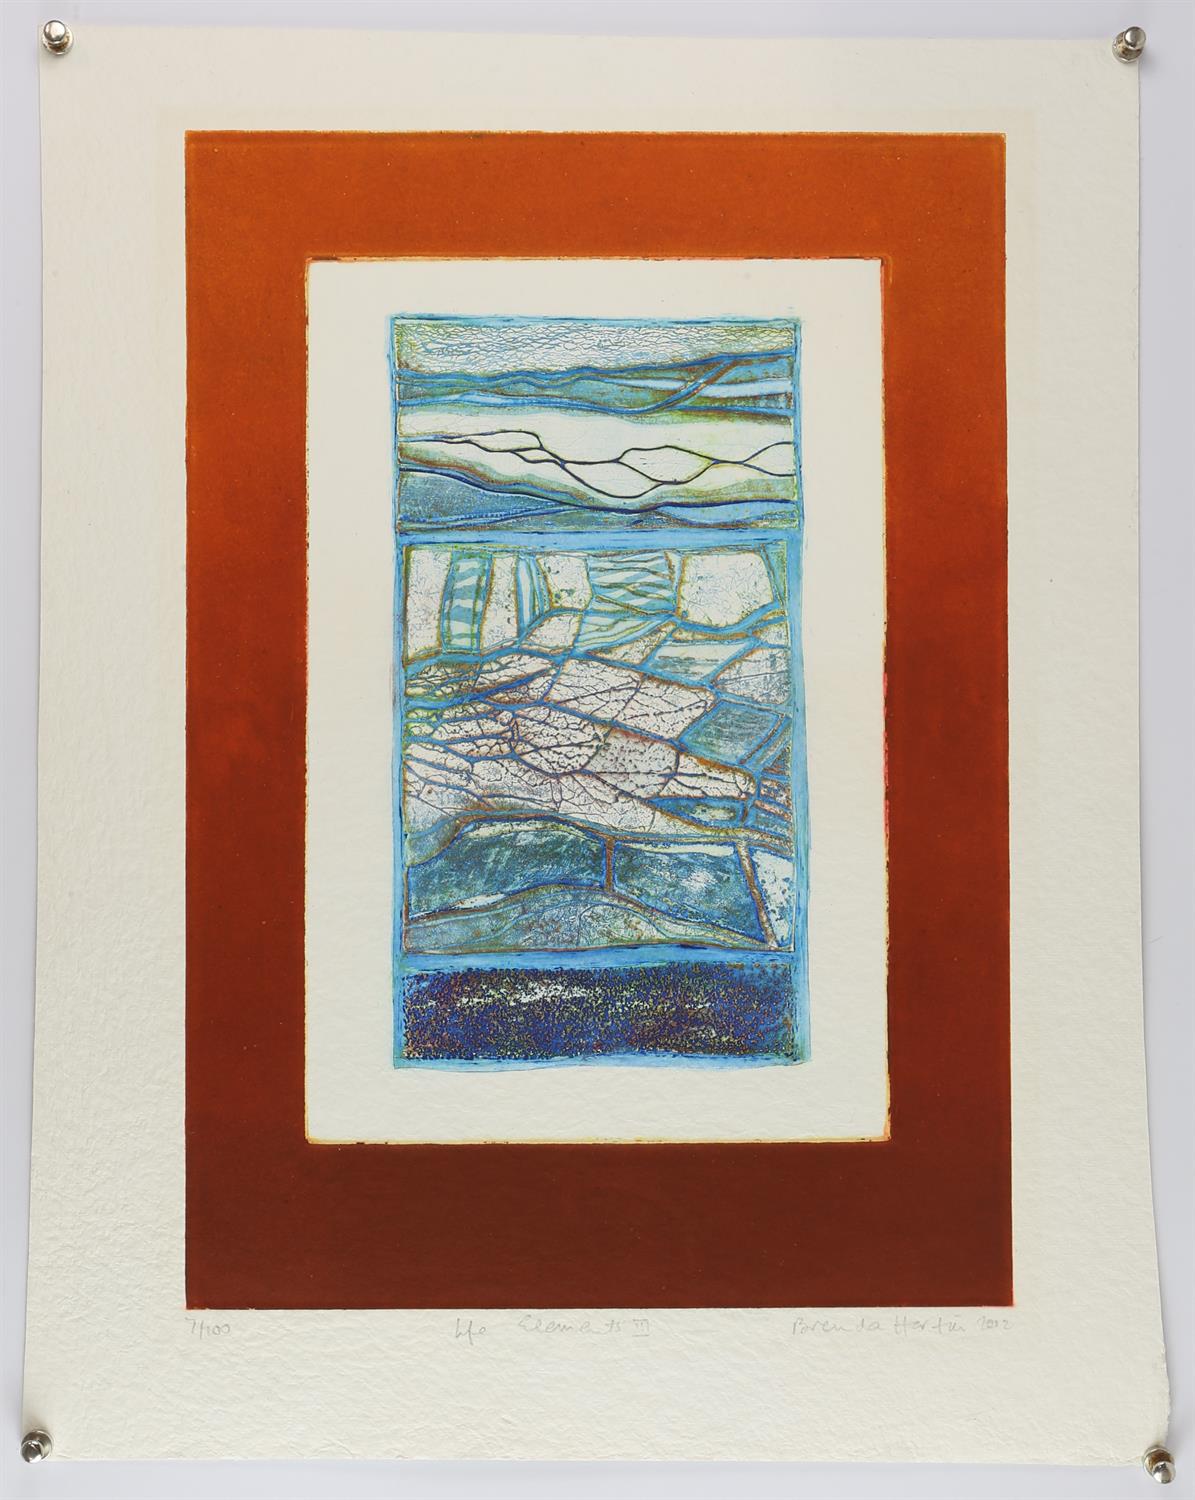 Brenda Hartill (b. 1943), 'Life Elements', collagraph, ed. 7/100, signed in pencil to margin,